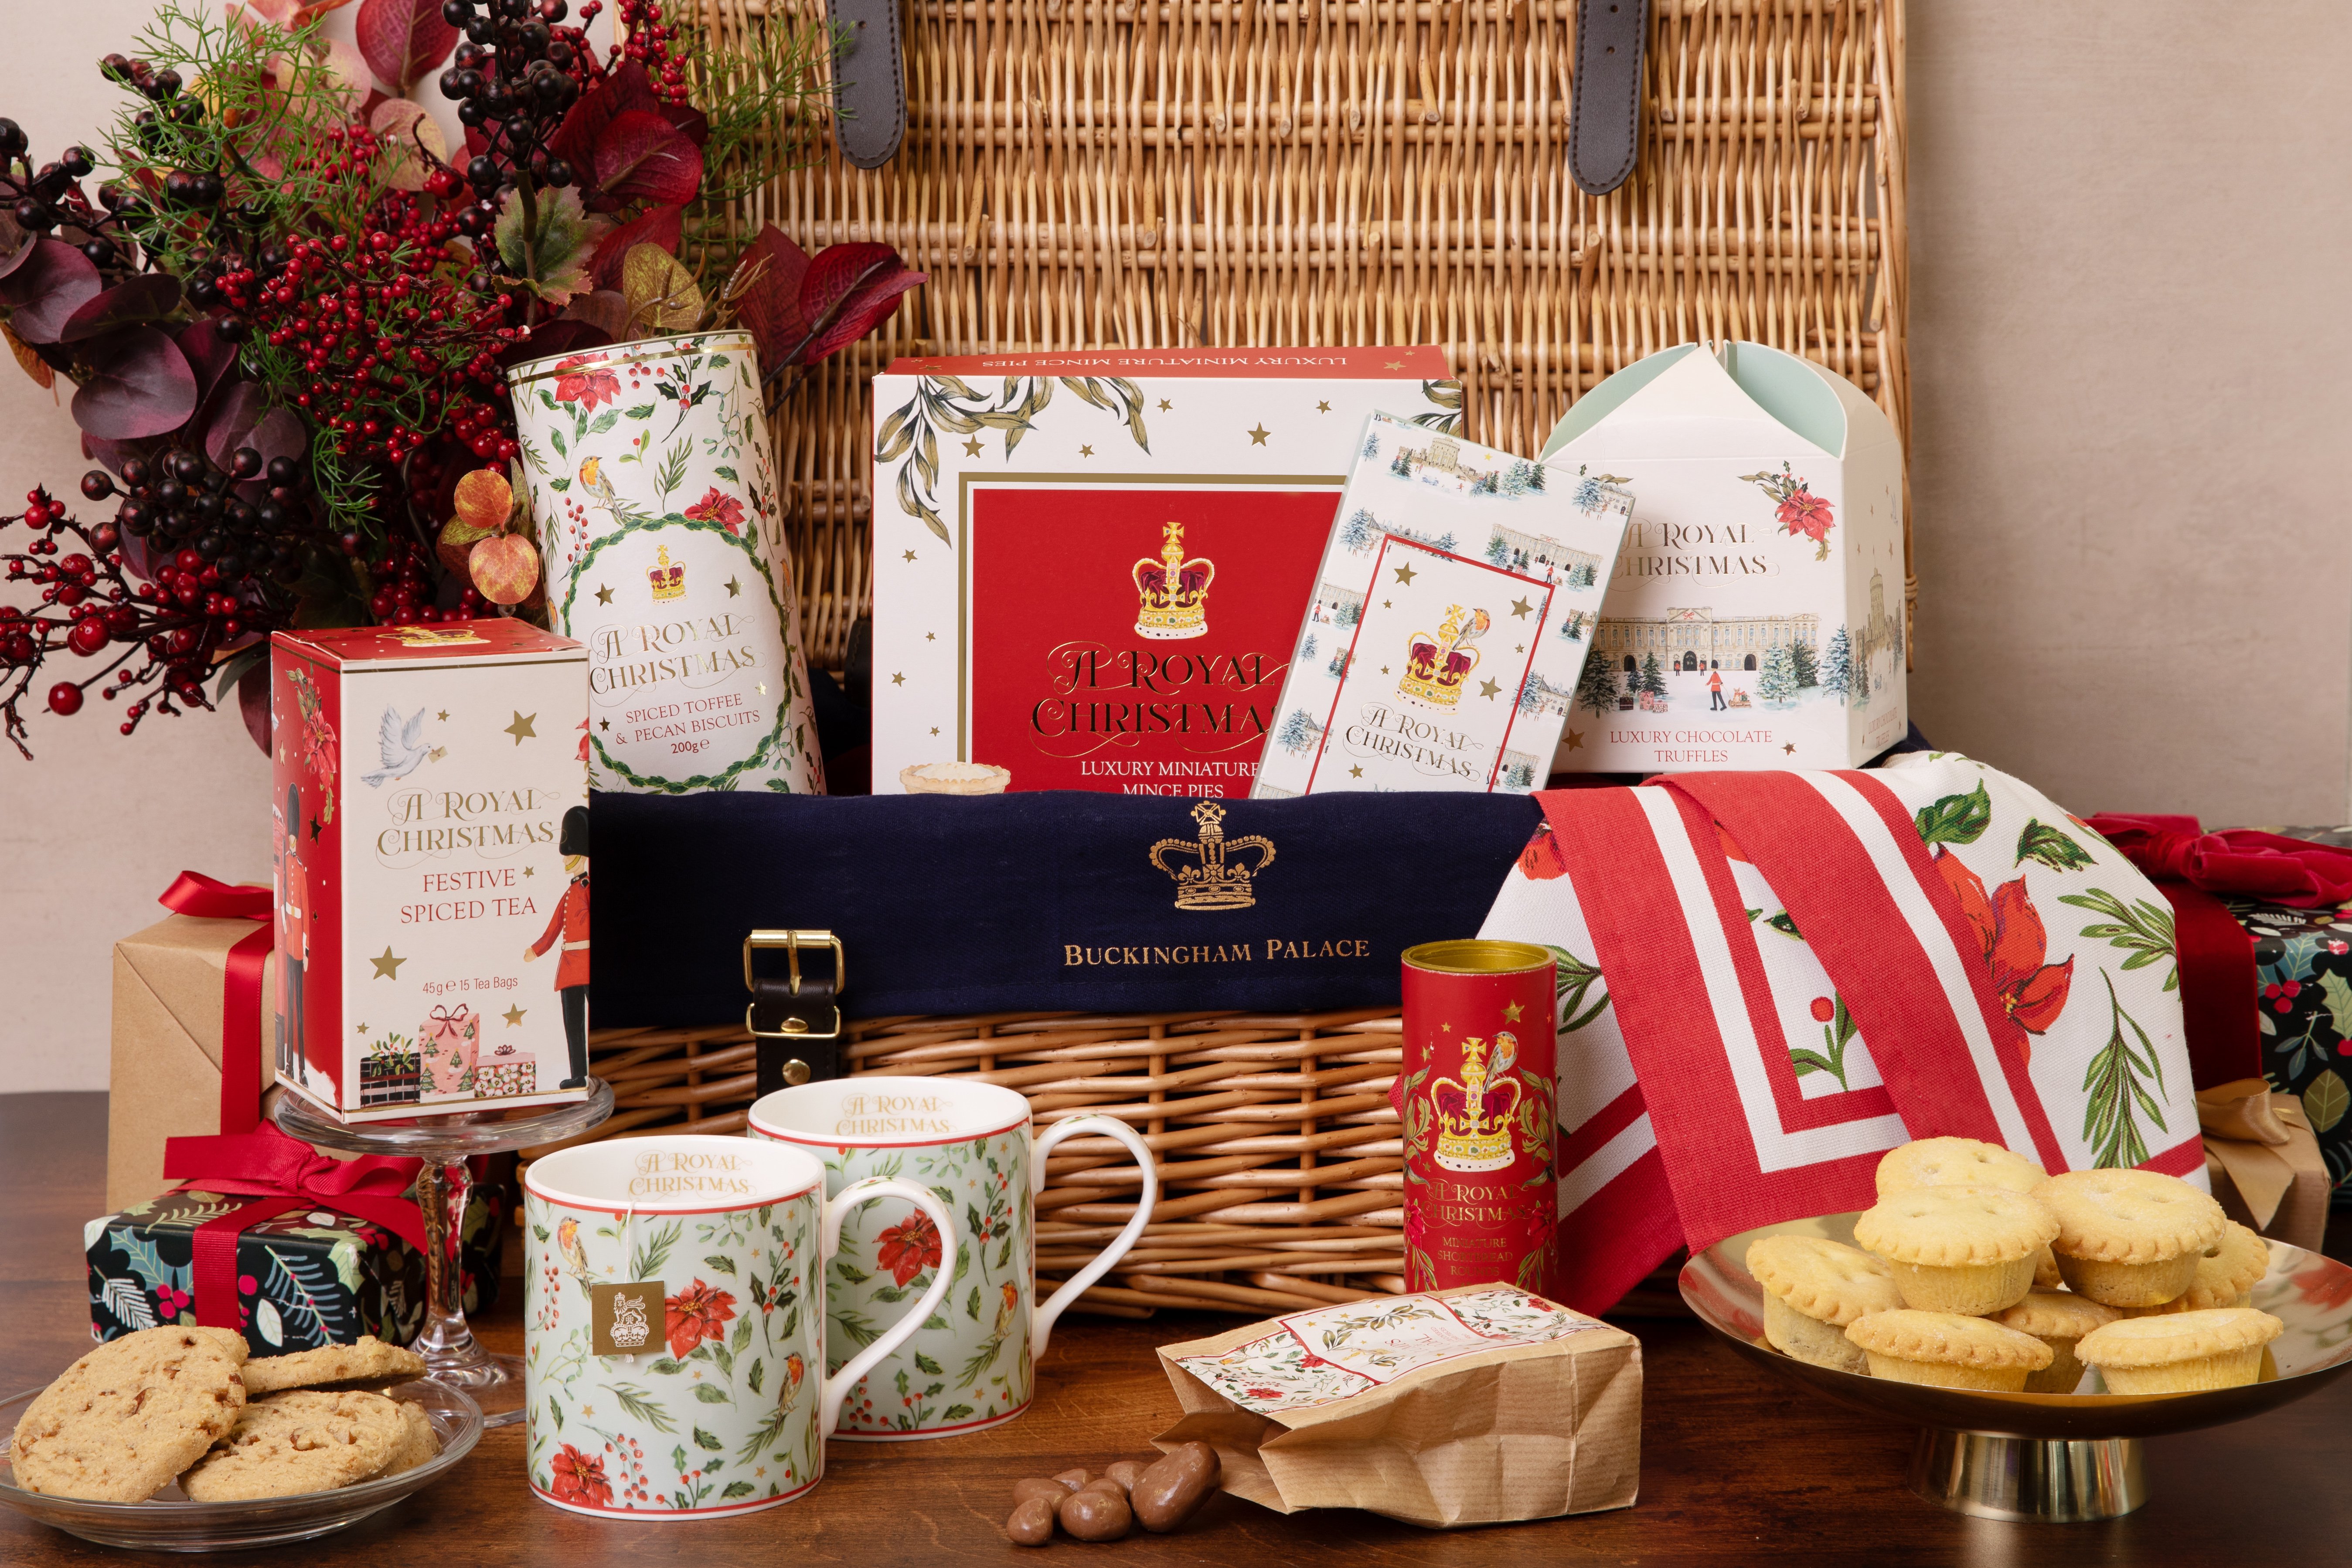 The contents of the Royal Christmas Hamper